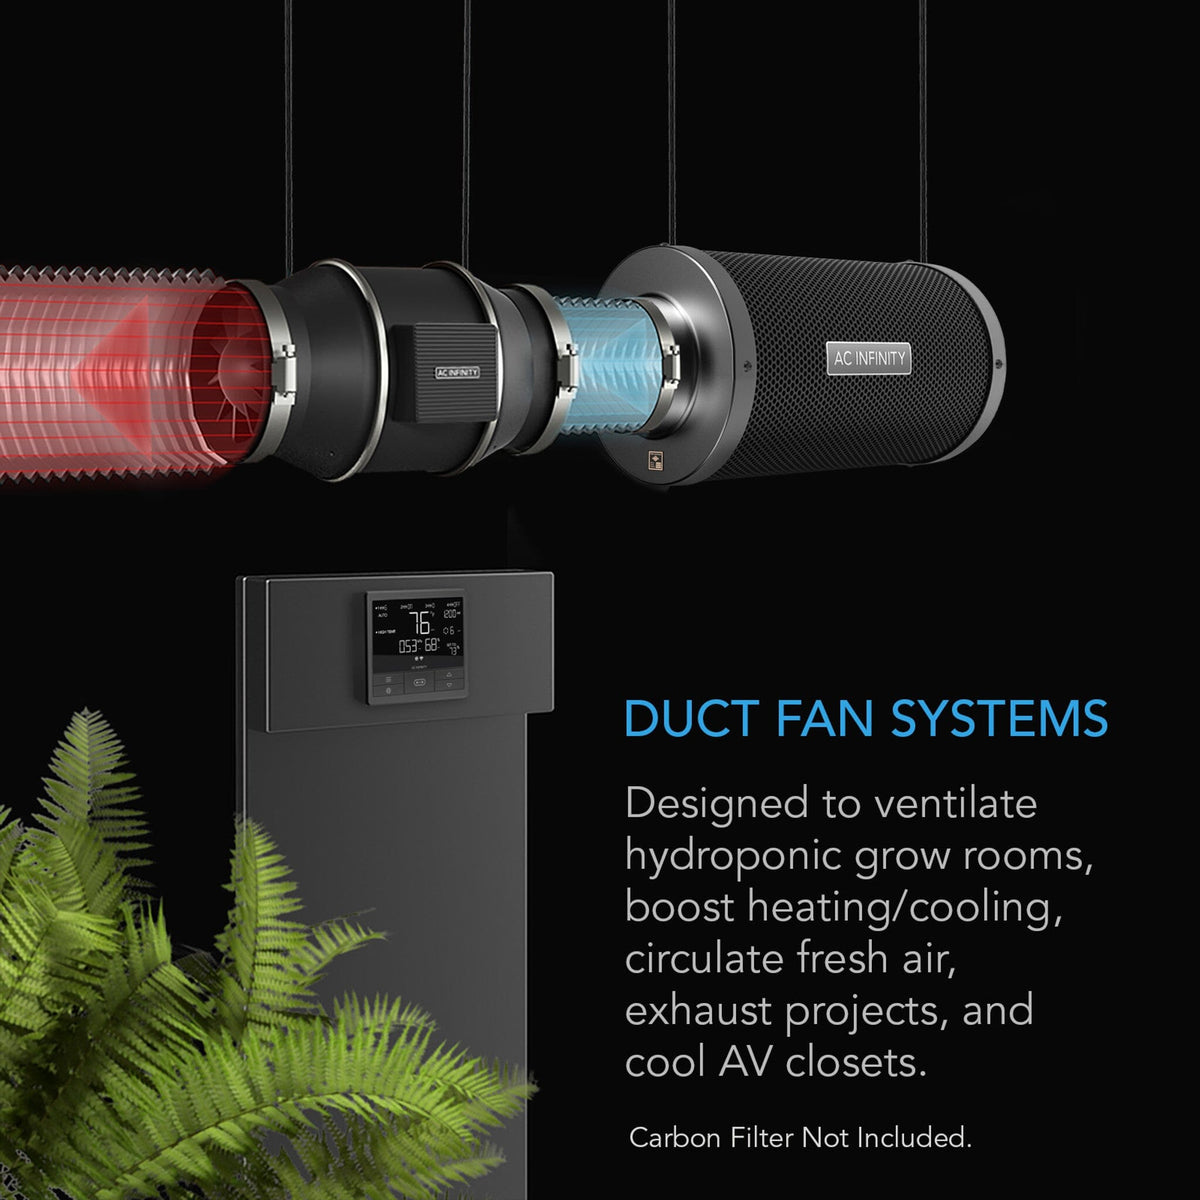 Duct fan system for ventilation of attics , subflooring and other rooms